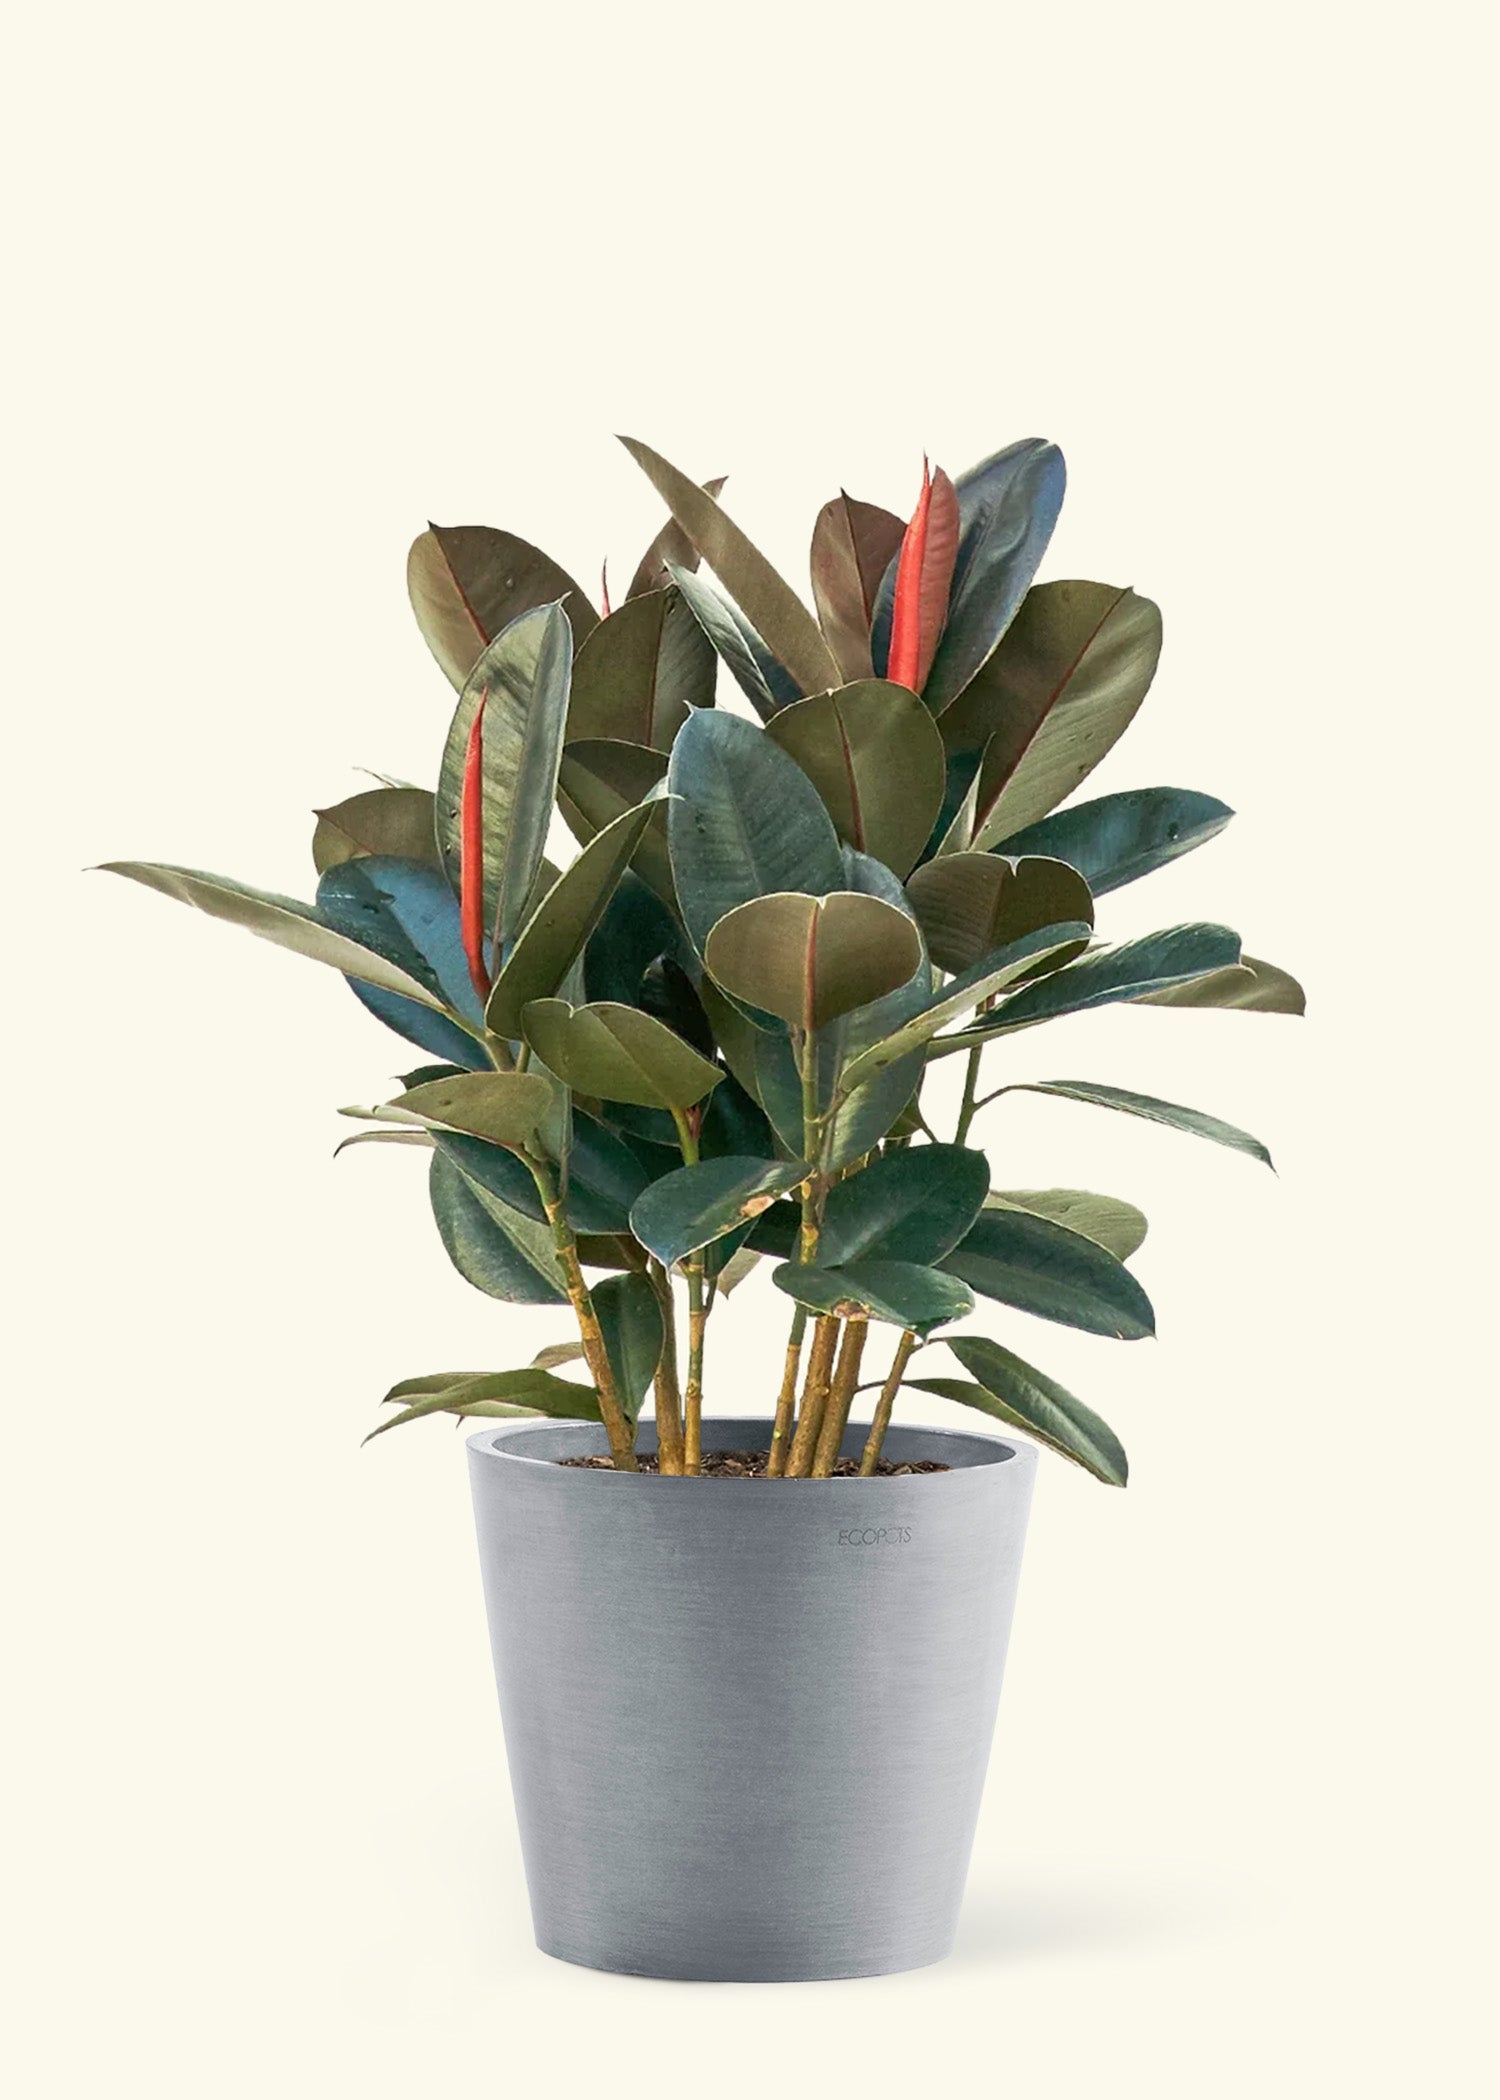 Large Rubber Tree 'Burgundy' in a gray stone pot.